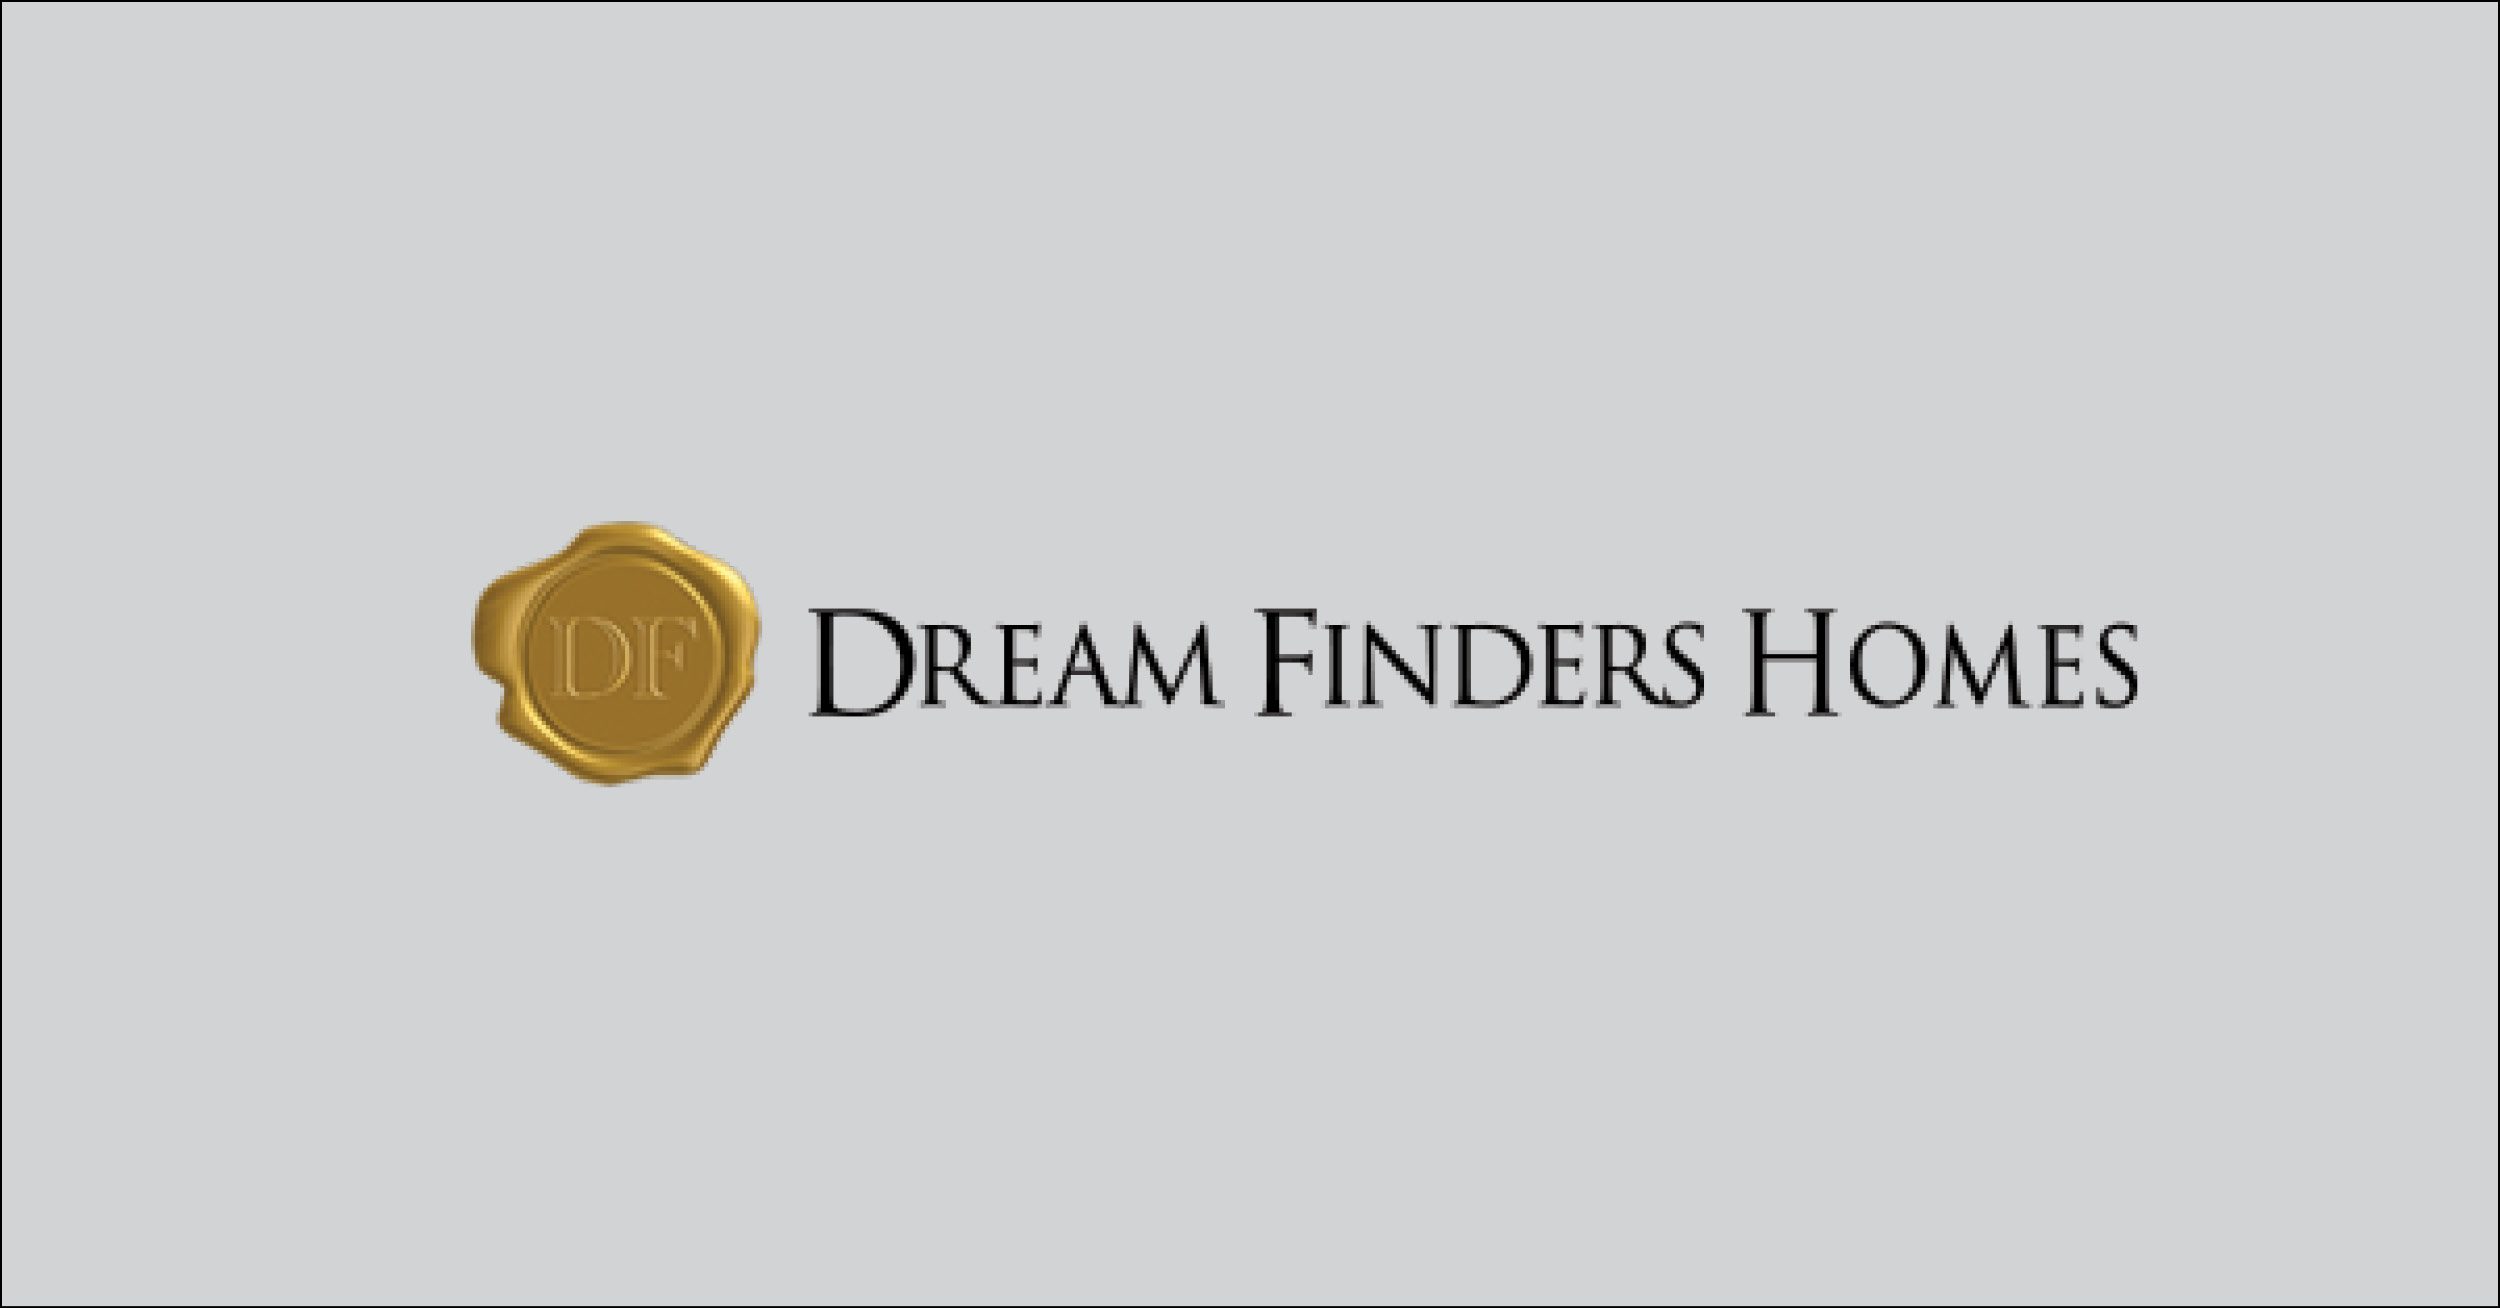 Find new construction or search for new homes and communities by Dream Finders Homes in Colorado